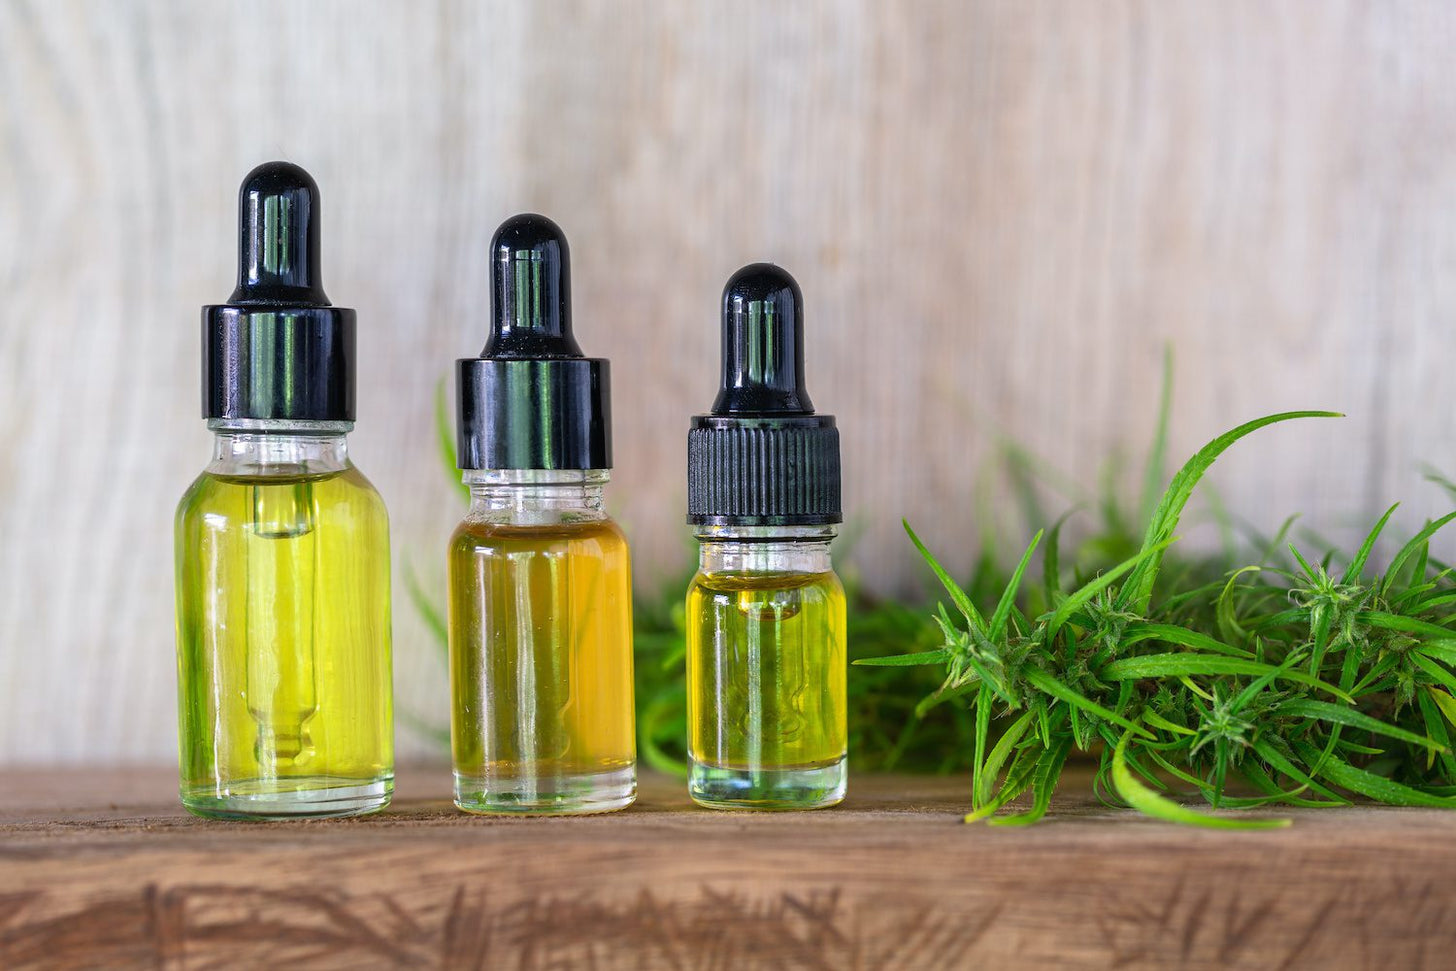 Three CBD oil bottles on a wooden surface next to a bundle of hemp stalks and leaves